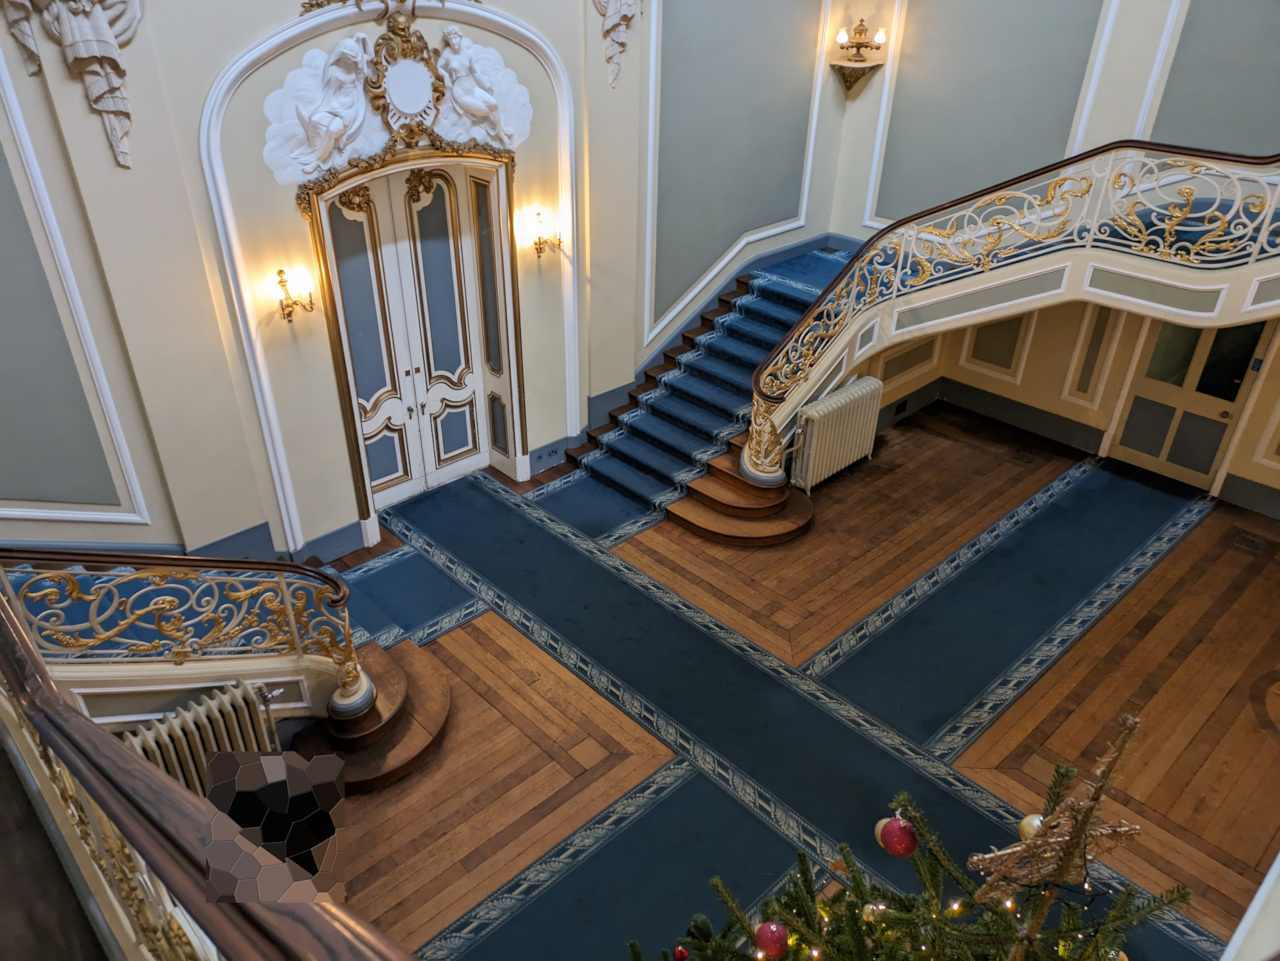 Staircase Hall from top of staircase.